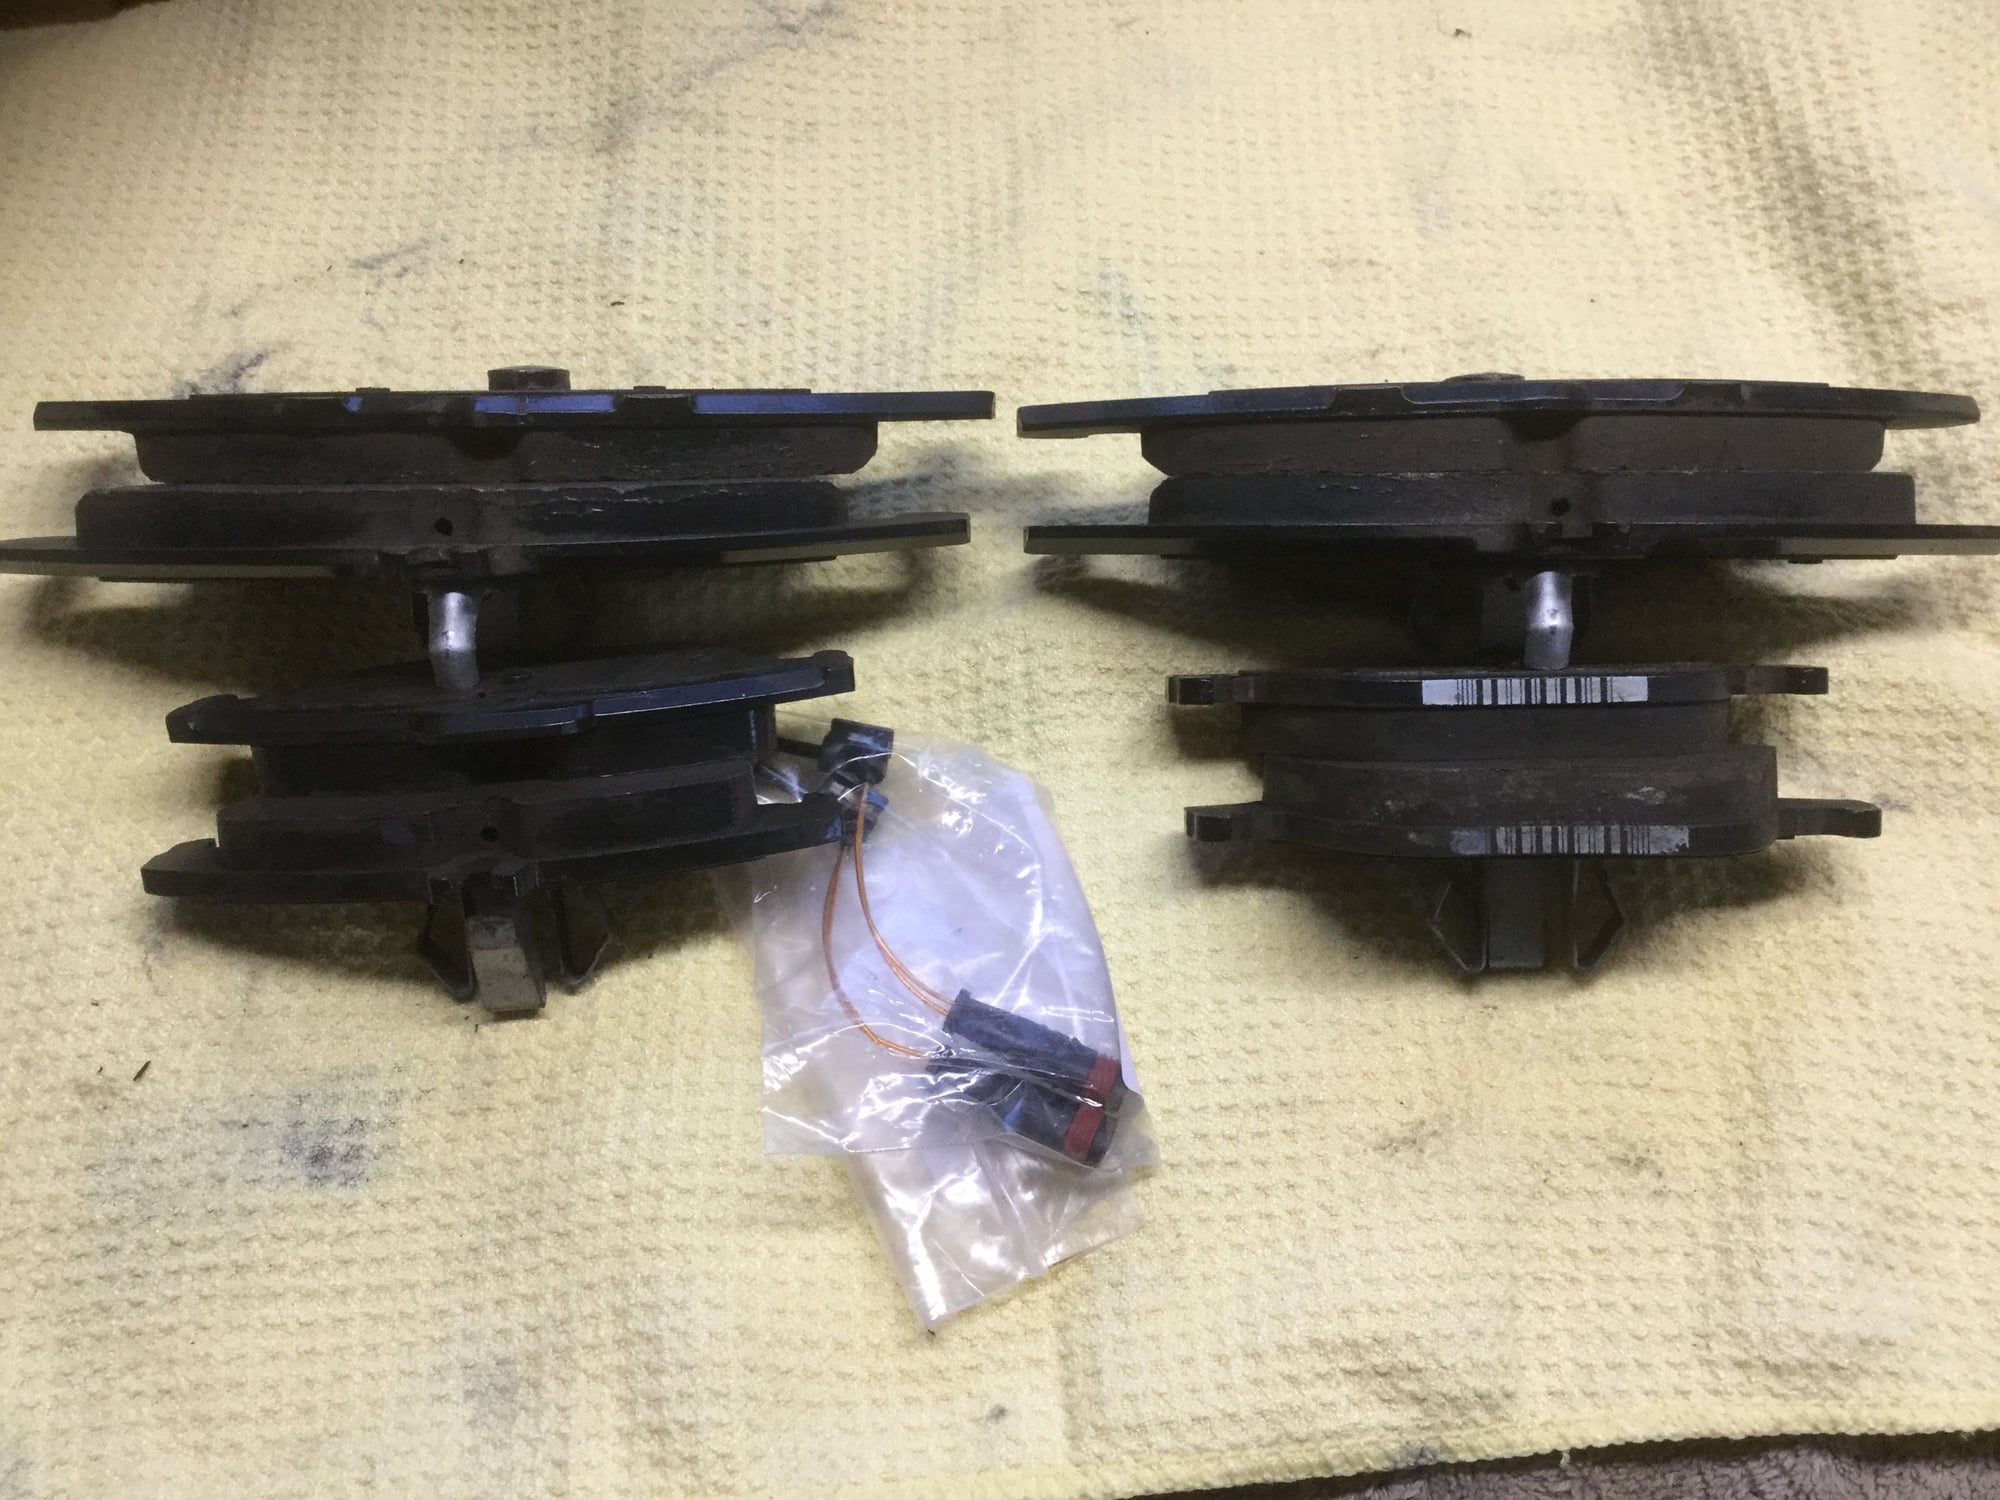 Brakes - OEM Brake Pads - Used - 2008 to 2013 Mercedes-Benz E550 - Dublin, CA 94568, United States